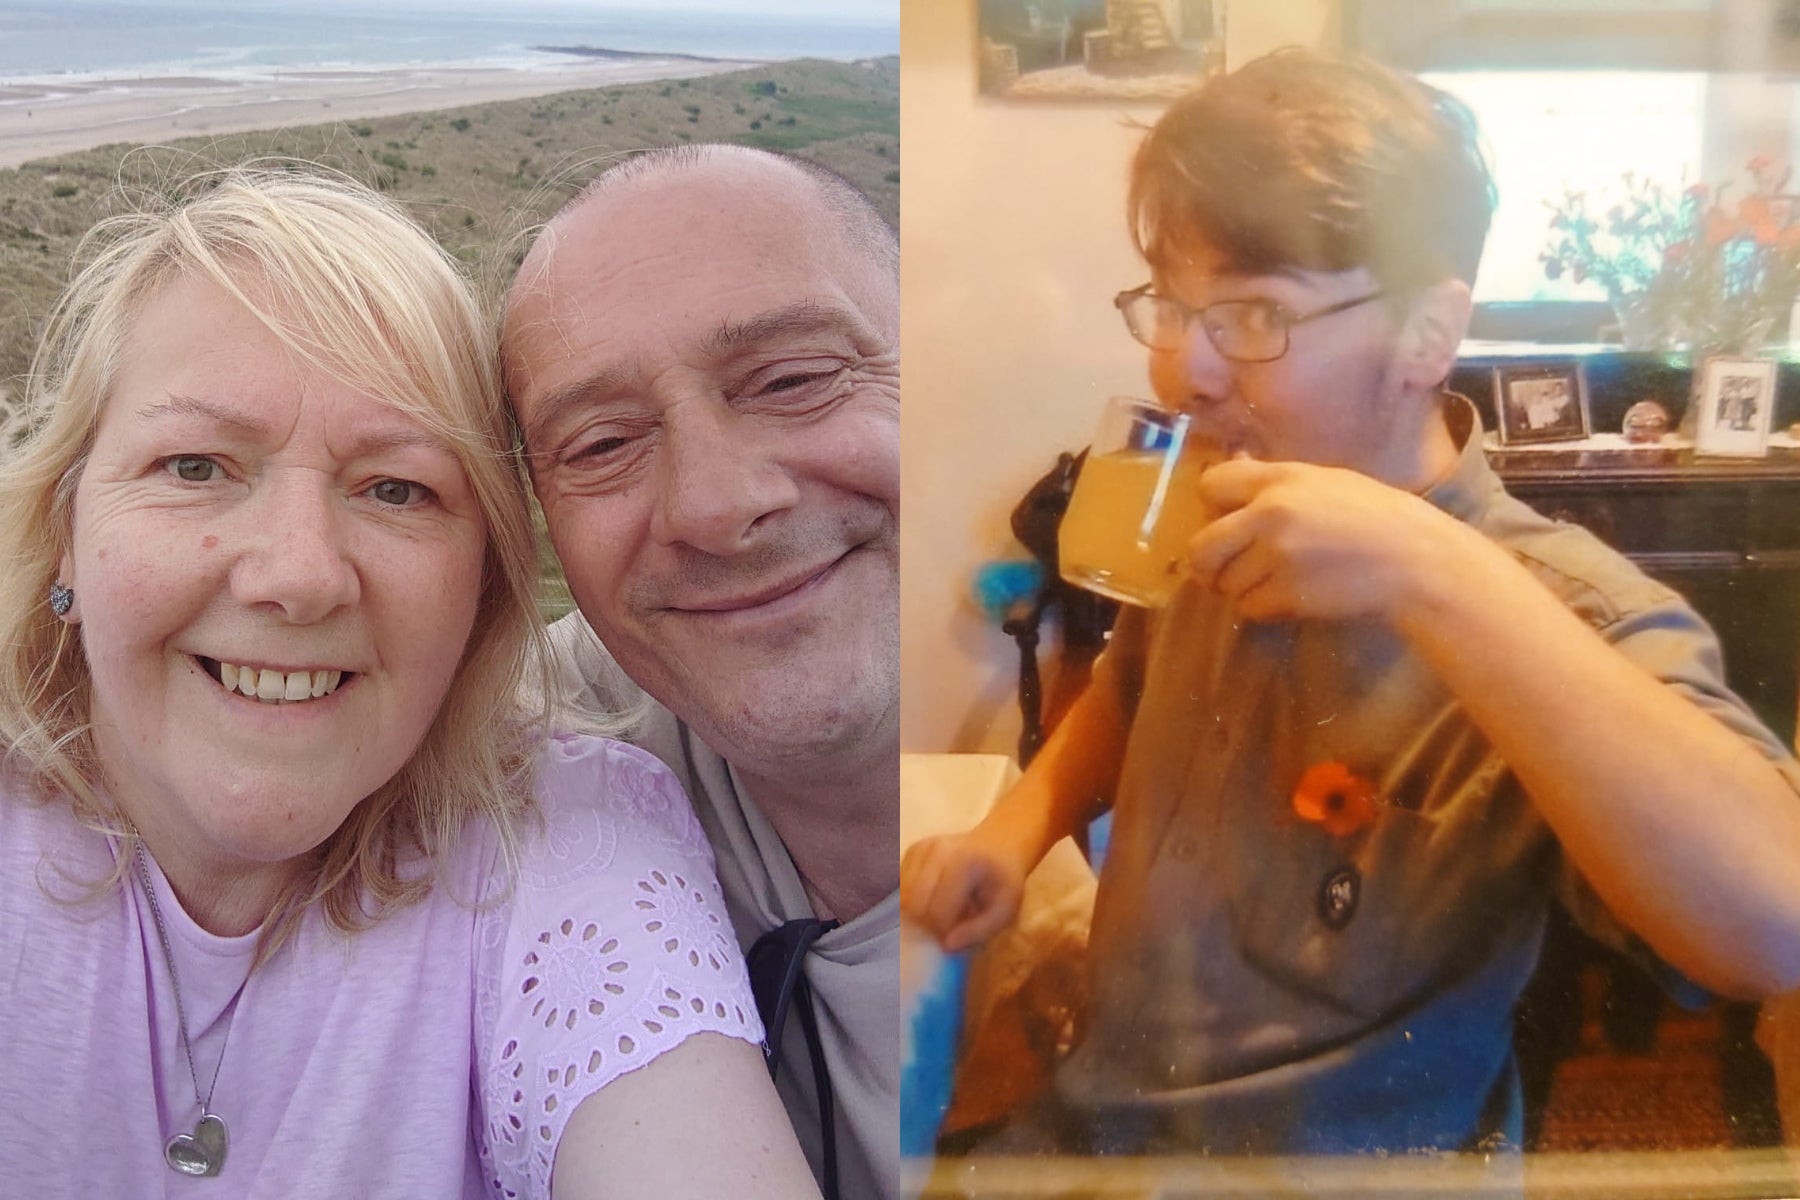 Jackie Leonard, 54, has launched a petition calling on the government to take action after her son Ben died while on Scouts trip in Wales